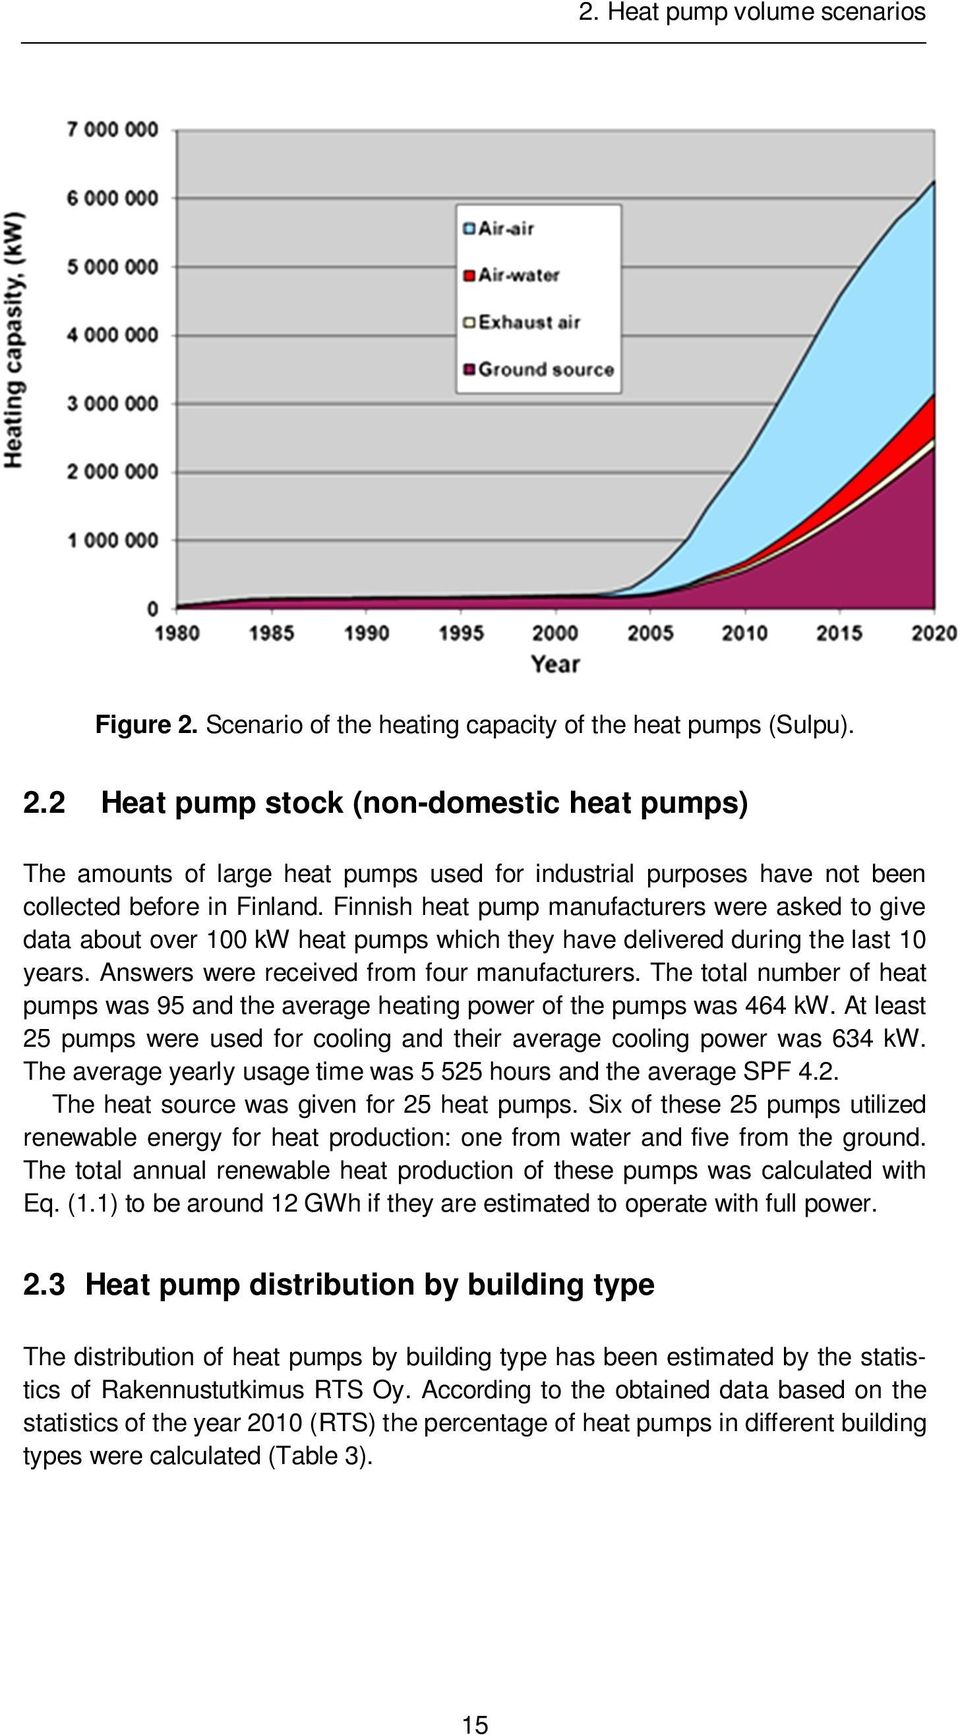 The total number of heat pumps was 95 and the average heating power of the pumps was 464 kw. At least 25 pumps were used for cooling and their average cooling power was 634 kw.